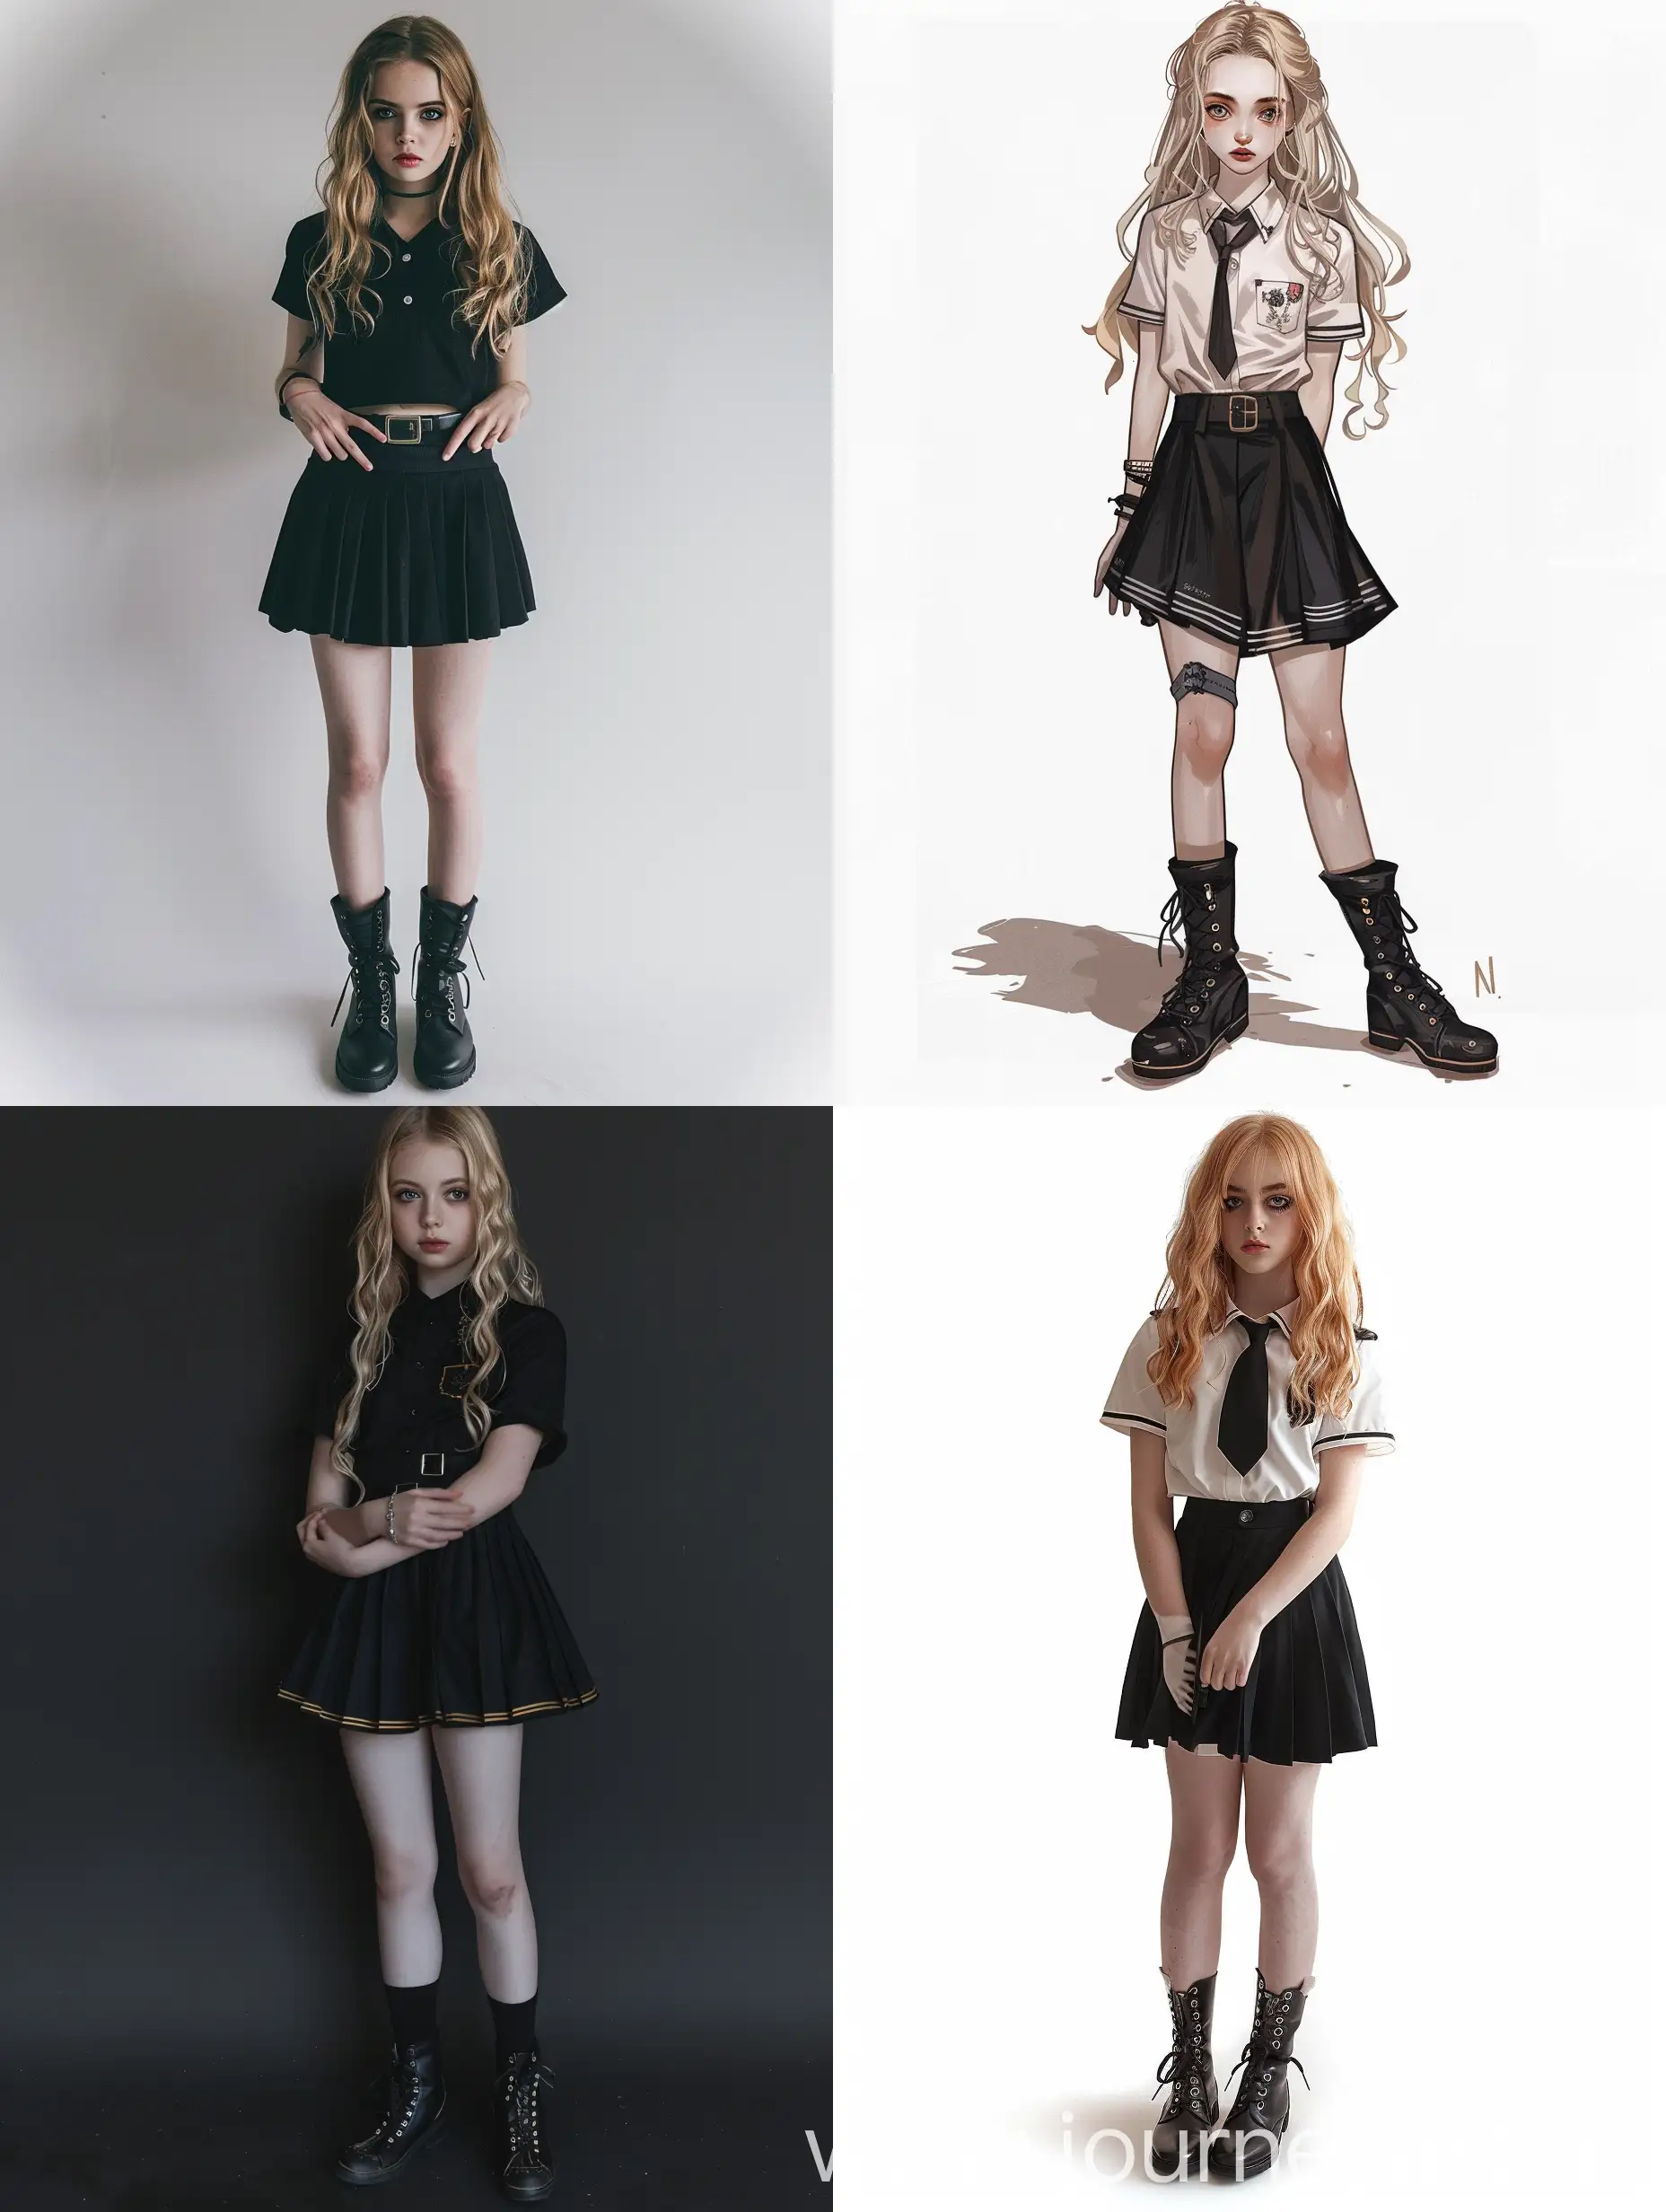 Blonde-Teenage-Girl-in-School-Uniform-with-Hands-on-Hips-and-Black-Boots